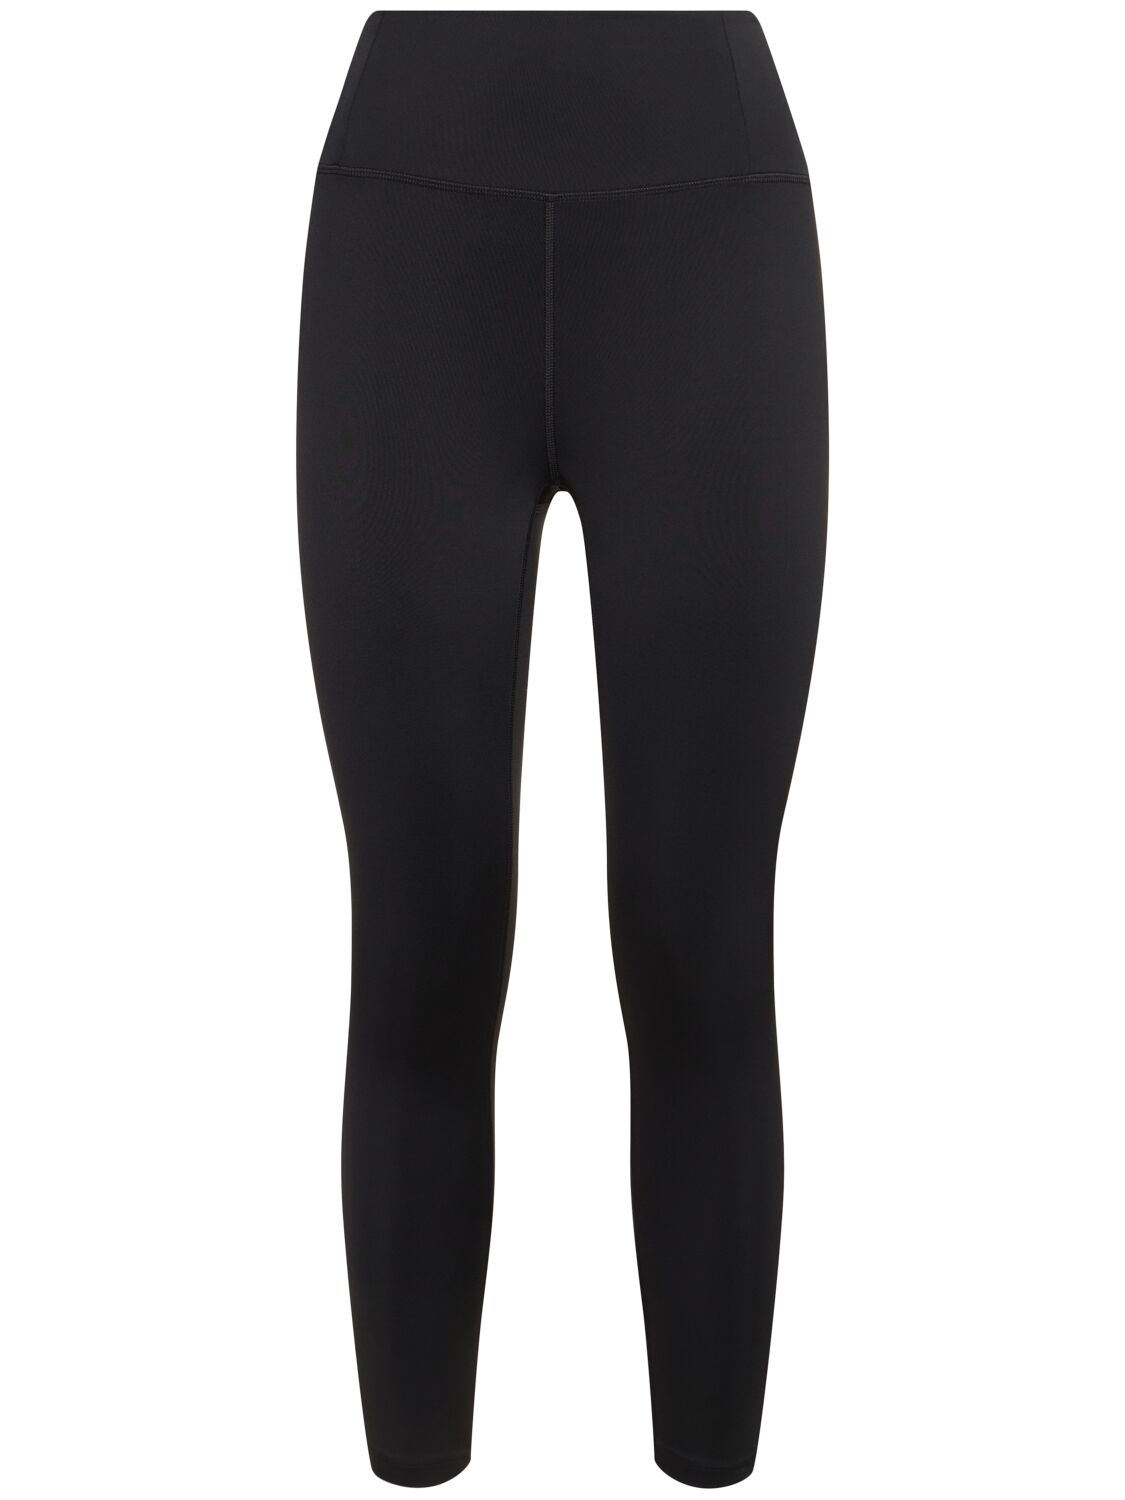 Girlfriend Collective Float Seamless High-rise 7/8 Leggings In Black